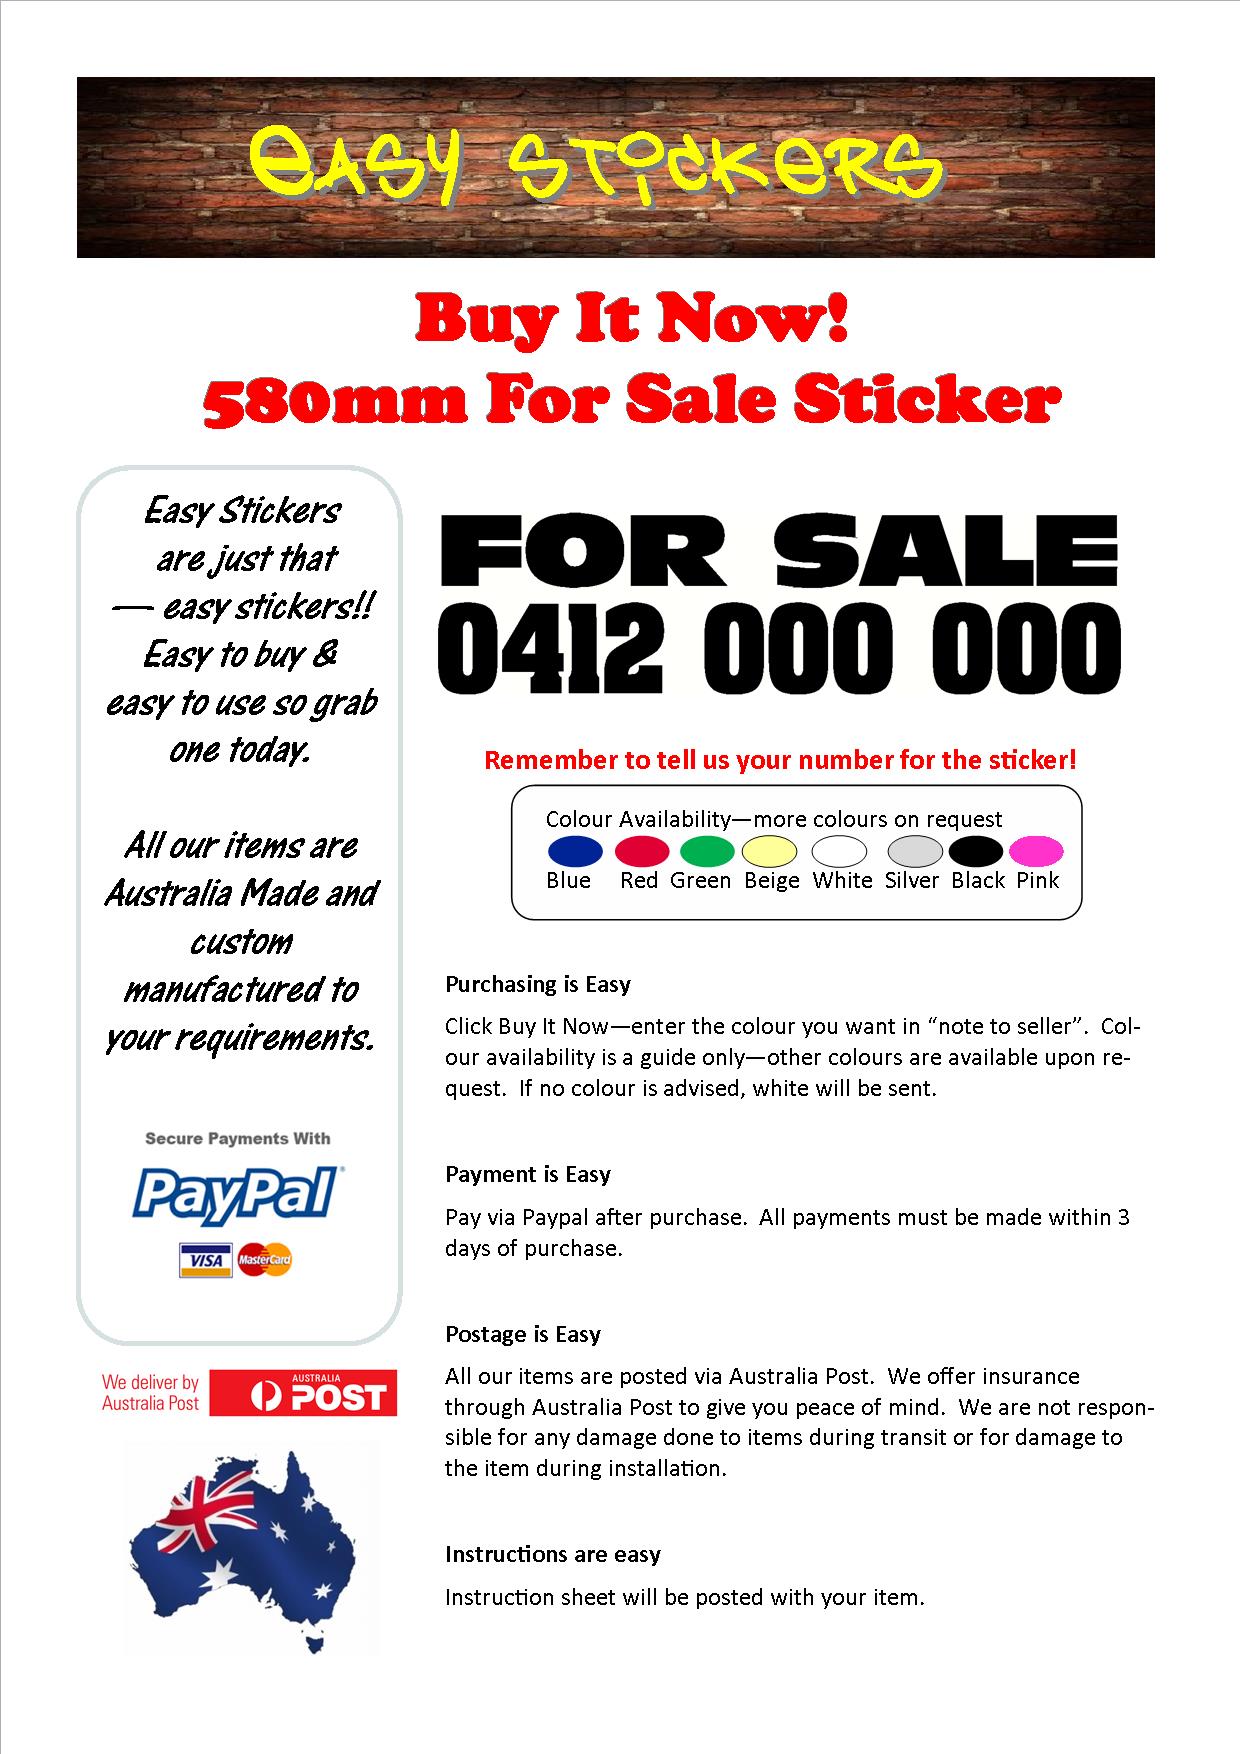 Ebay Template580mm For Sale.jpg  by easystickers